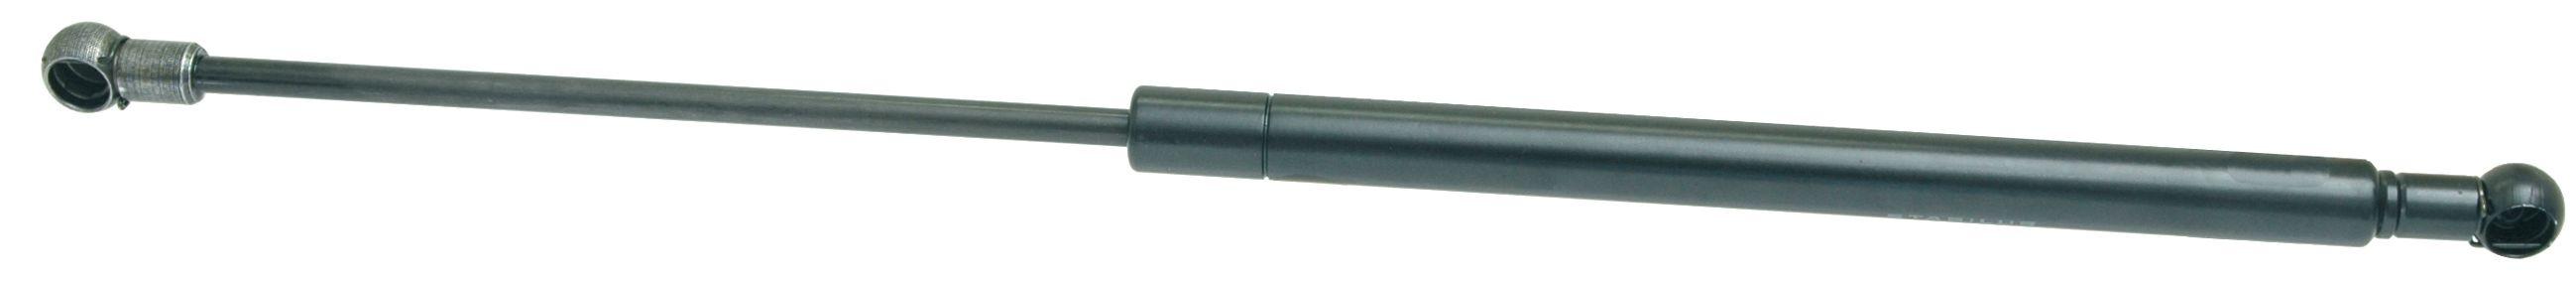 FORD NEW HOLLAND GAS STRUT 19404